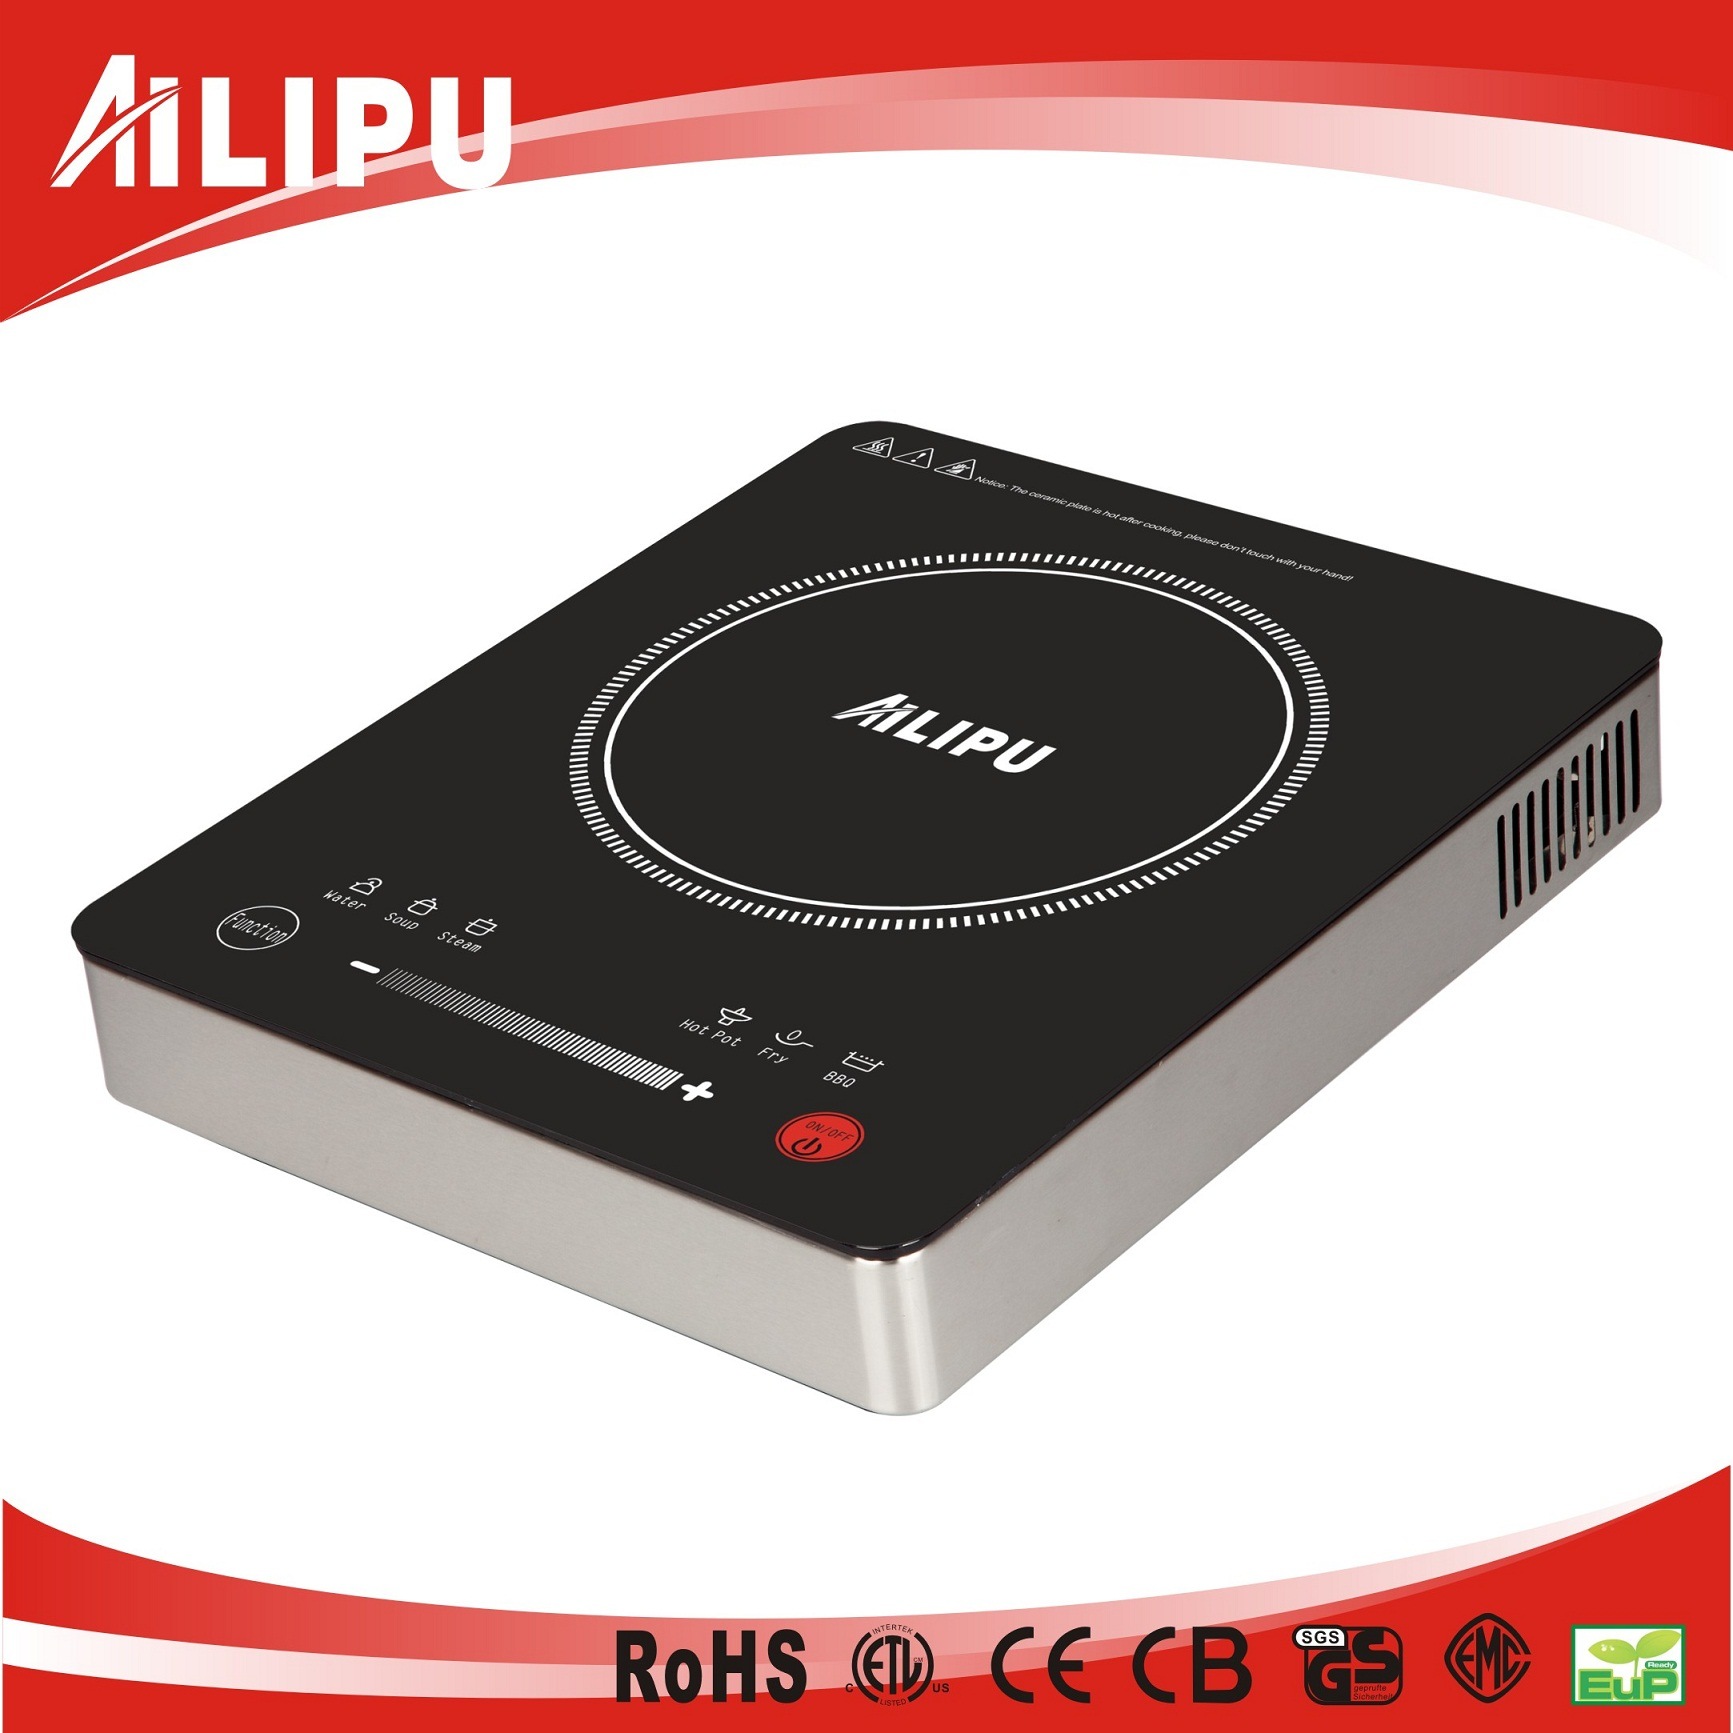 Commercial Induction Heater of Home Appliance, Kitchenware, Induction Heater, Stove, (SM-A80)